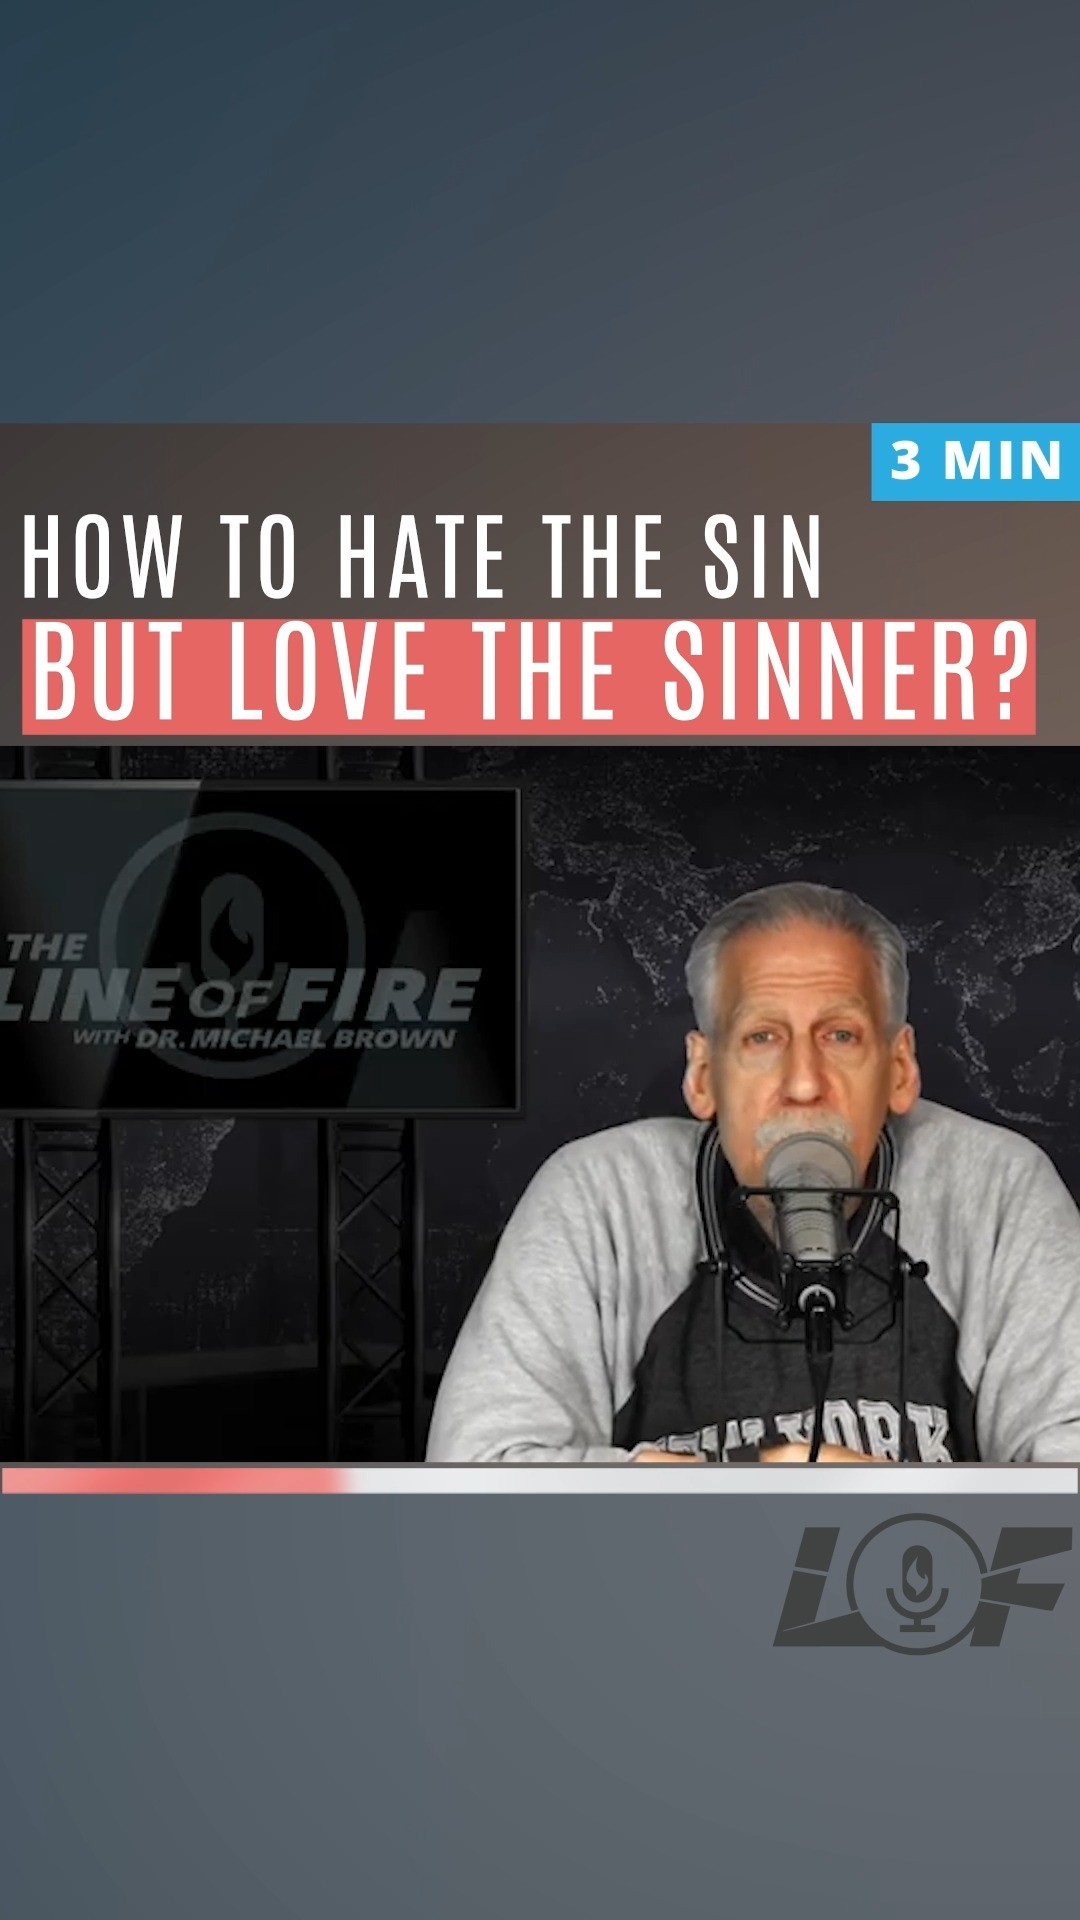 How To Hate The Sin But Love The Sinner?To love those who cause so much harm and destruction is easier said than done. Should we always love the sinner?